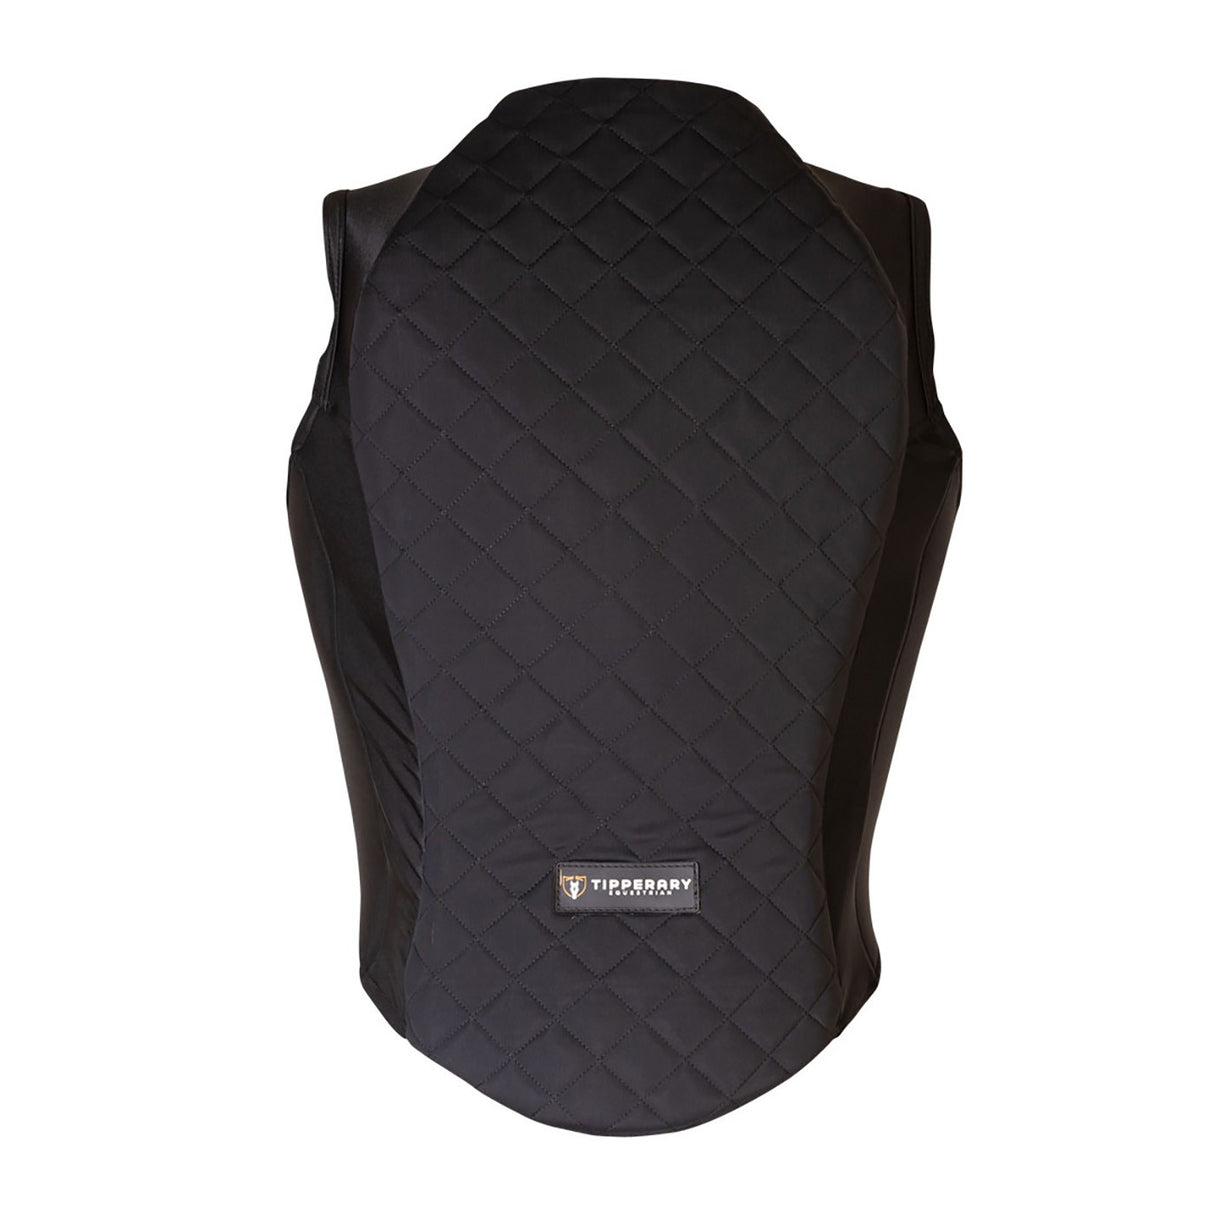 Tipperary Contour Flex Back Protector - Youth